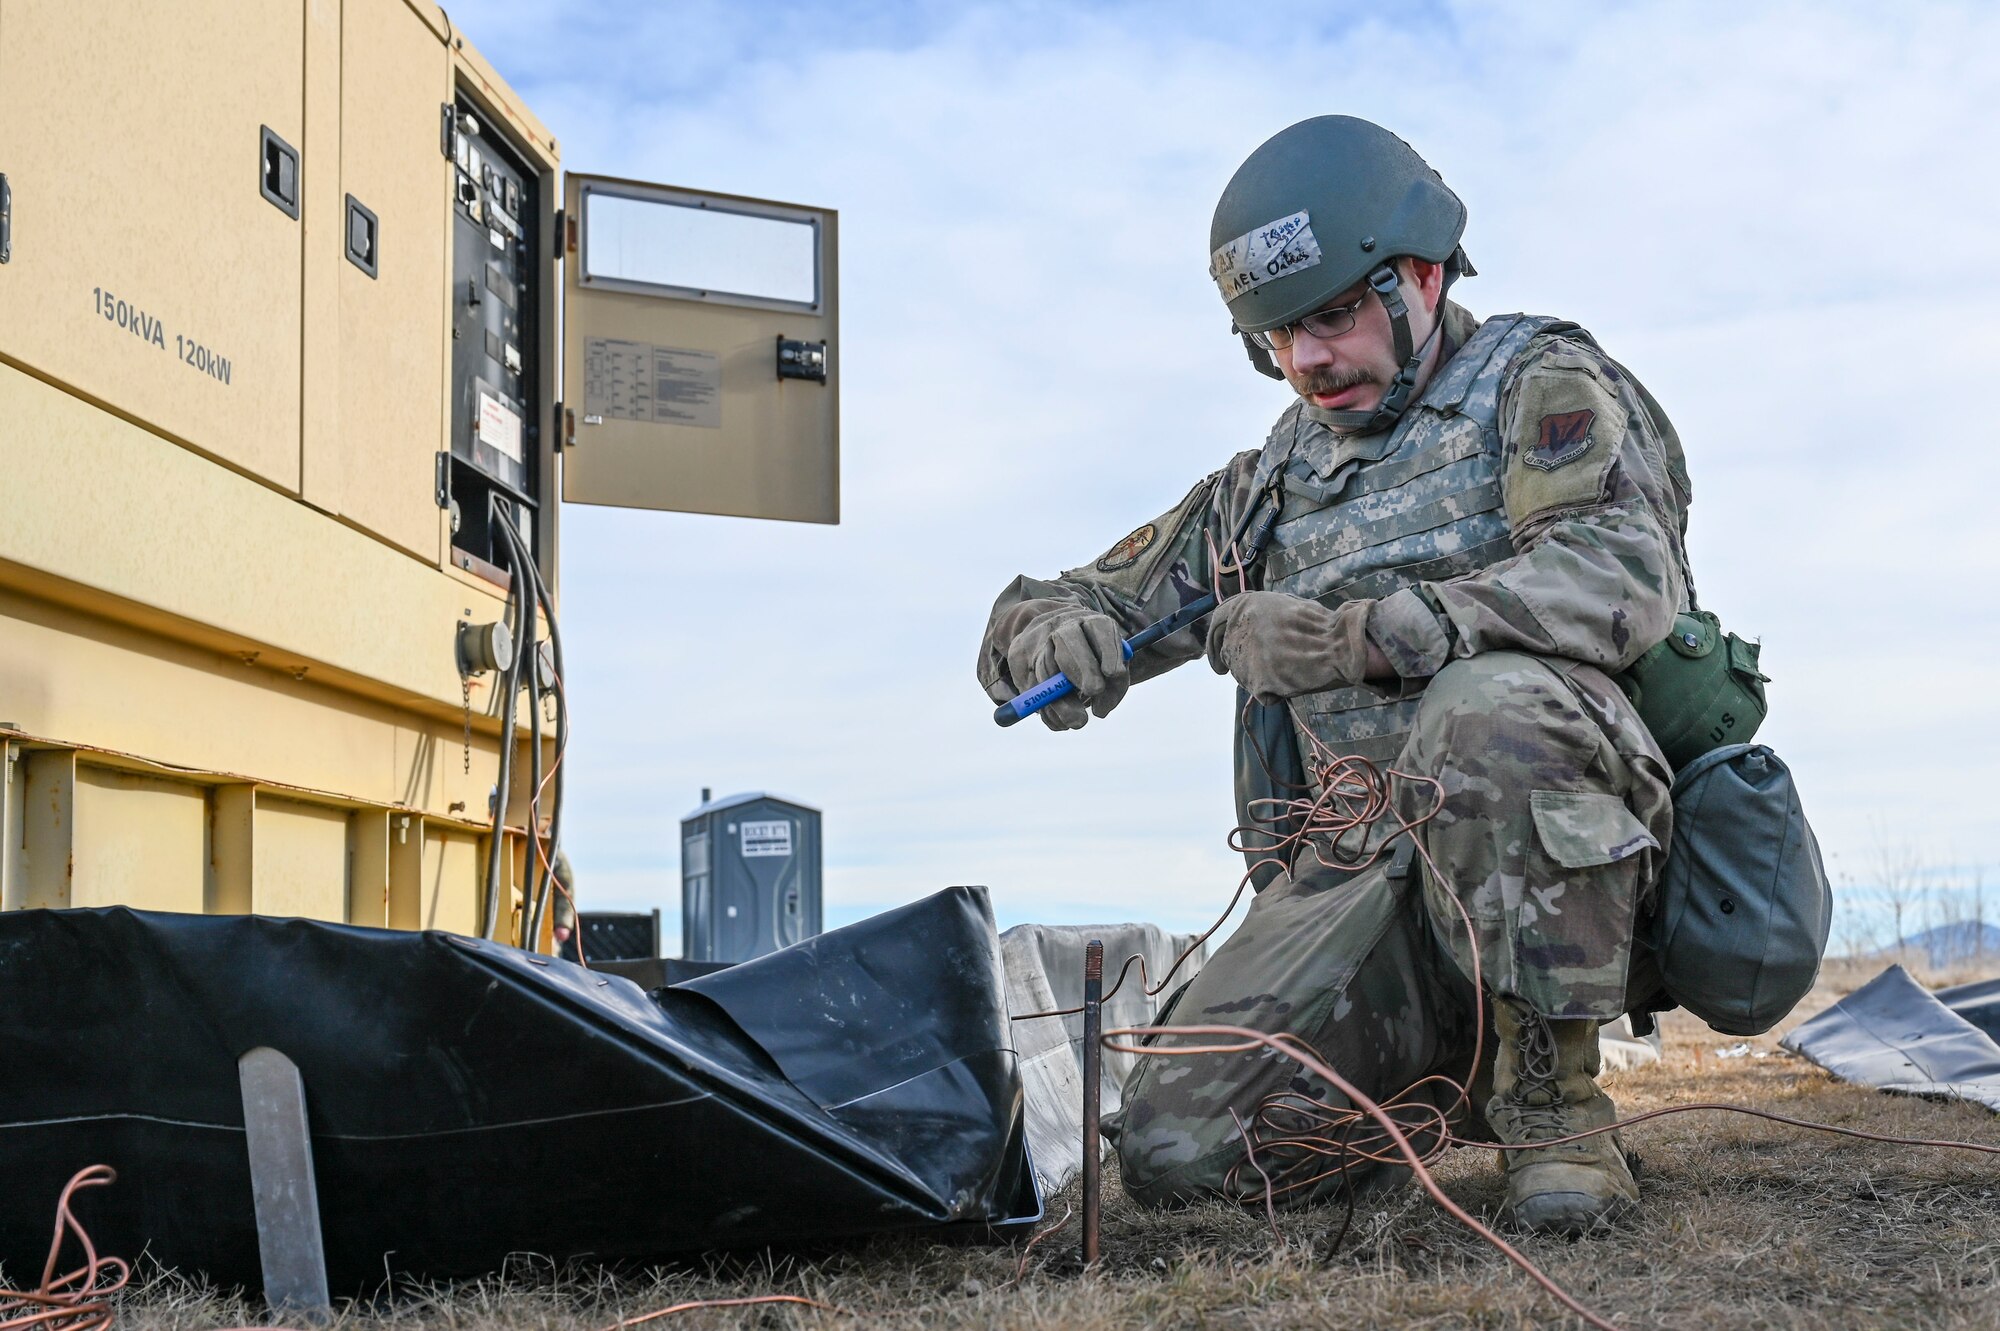 An Airman cutting a piece of copper wire.